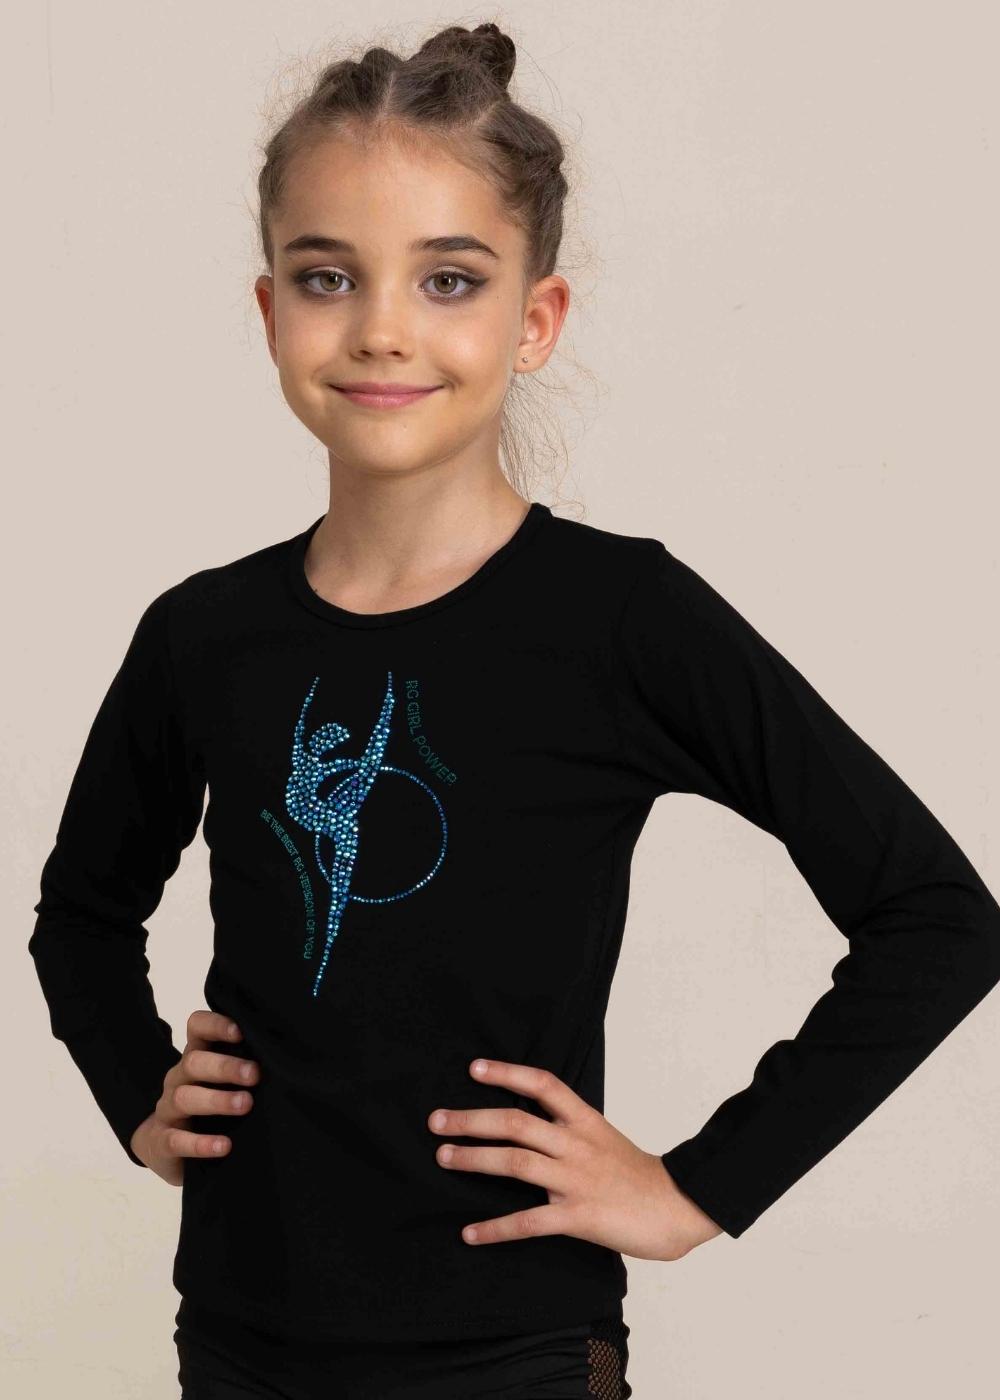 PAMELA T-shirt, gymnast with a hoop by Grand Prix